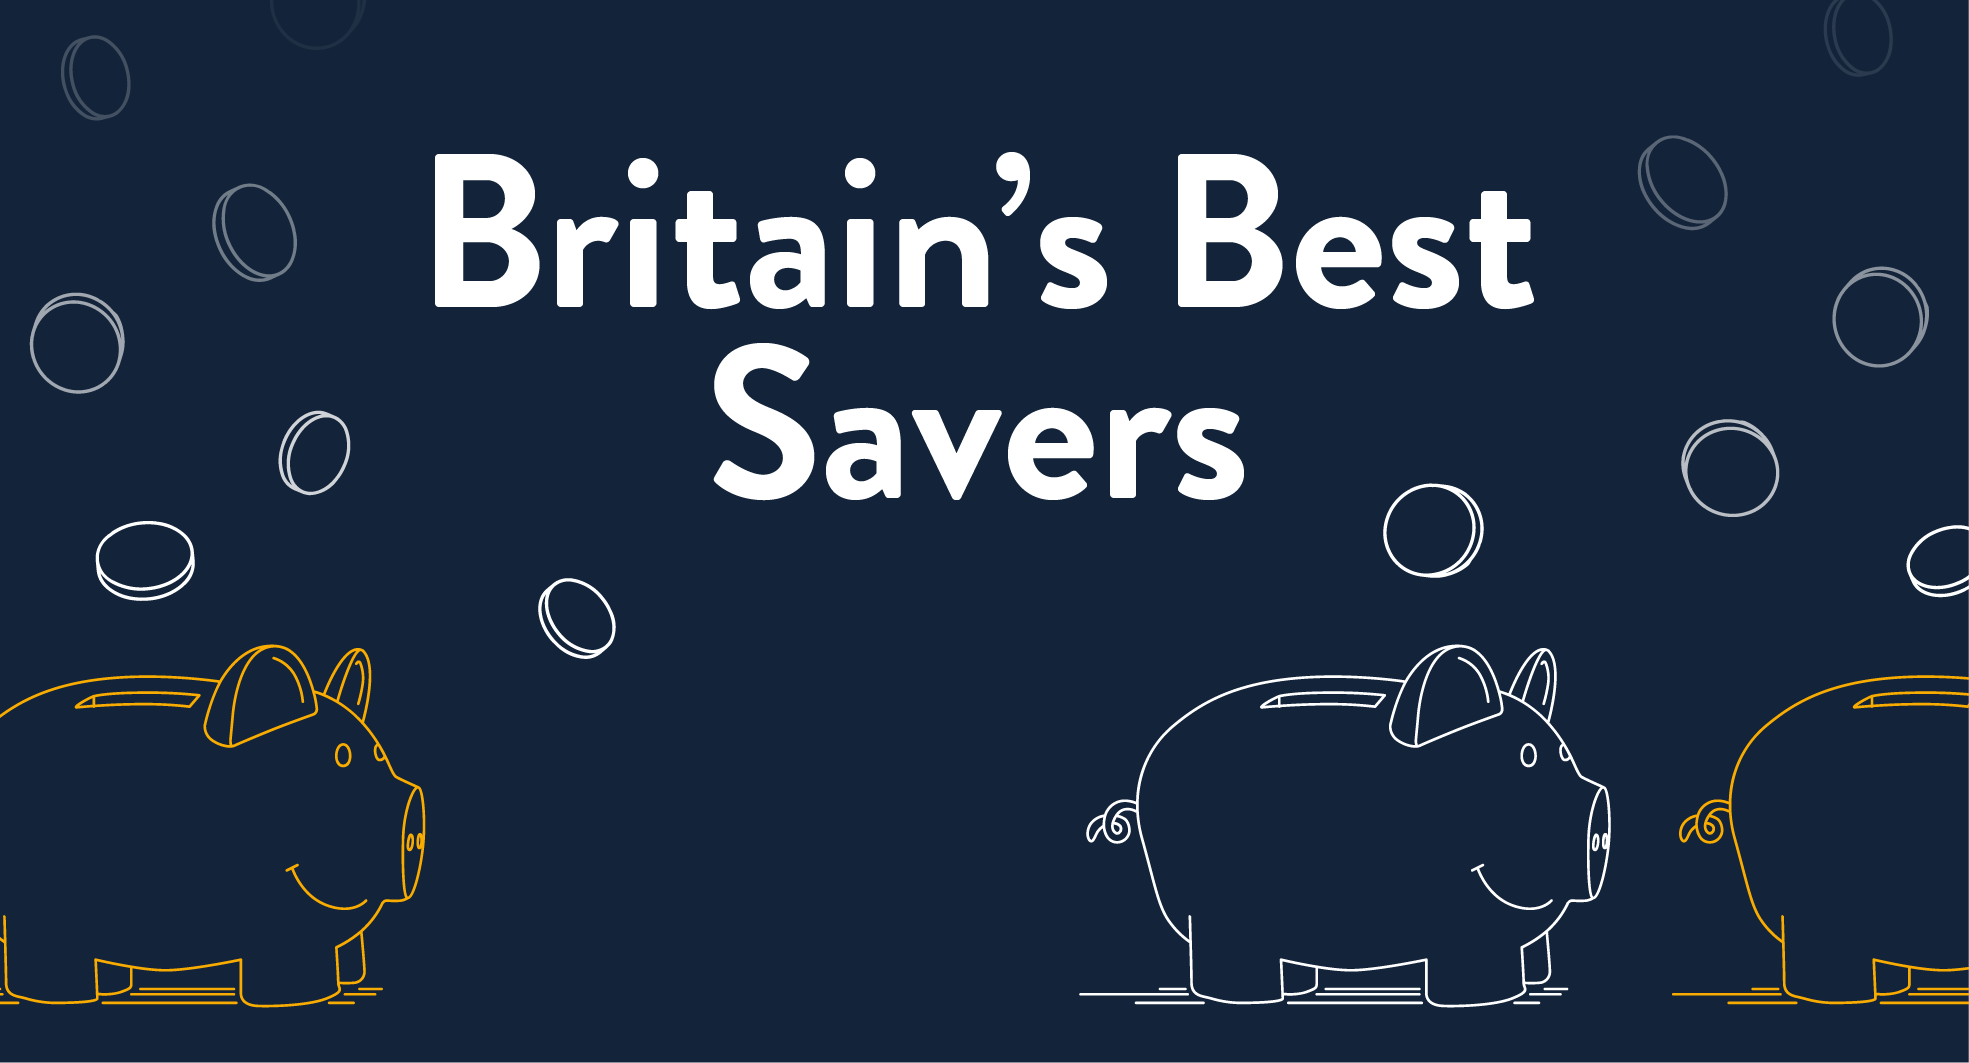 Britain's Best Savers title image with coins falling and piggybanks